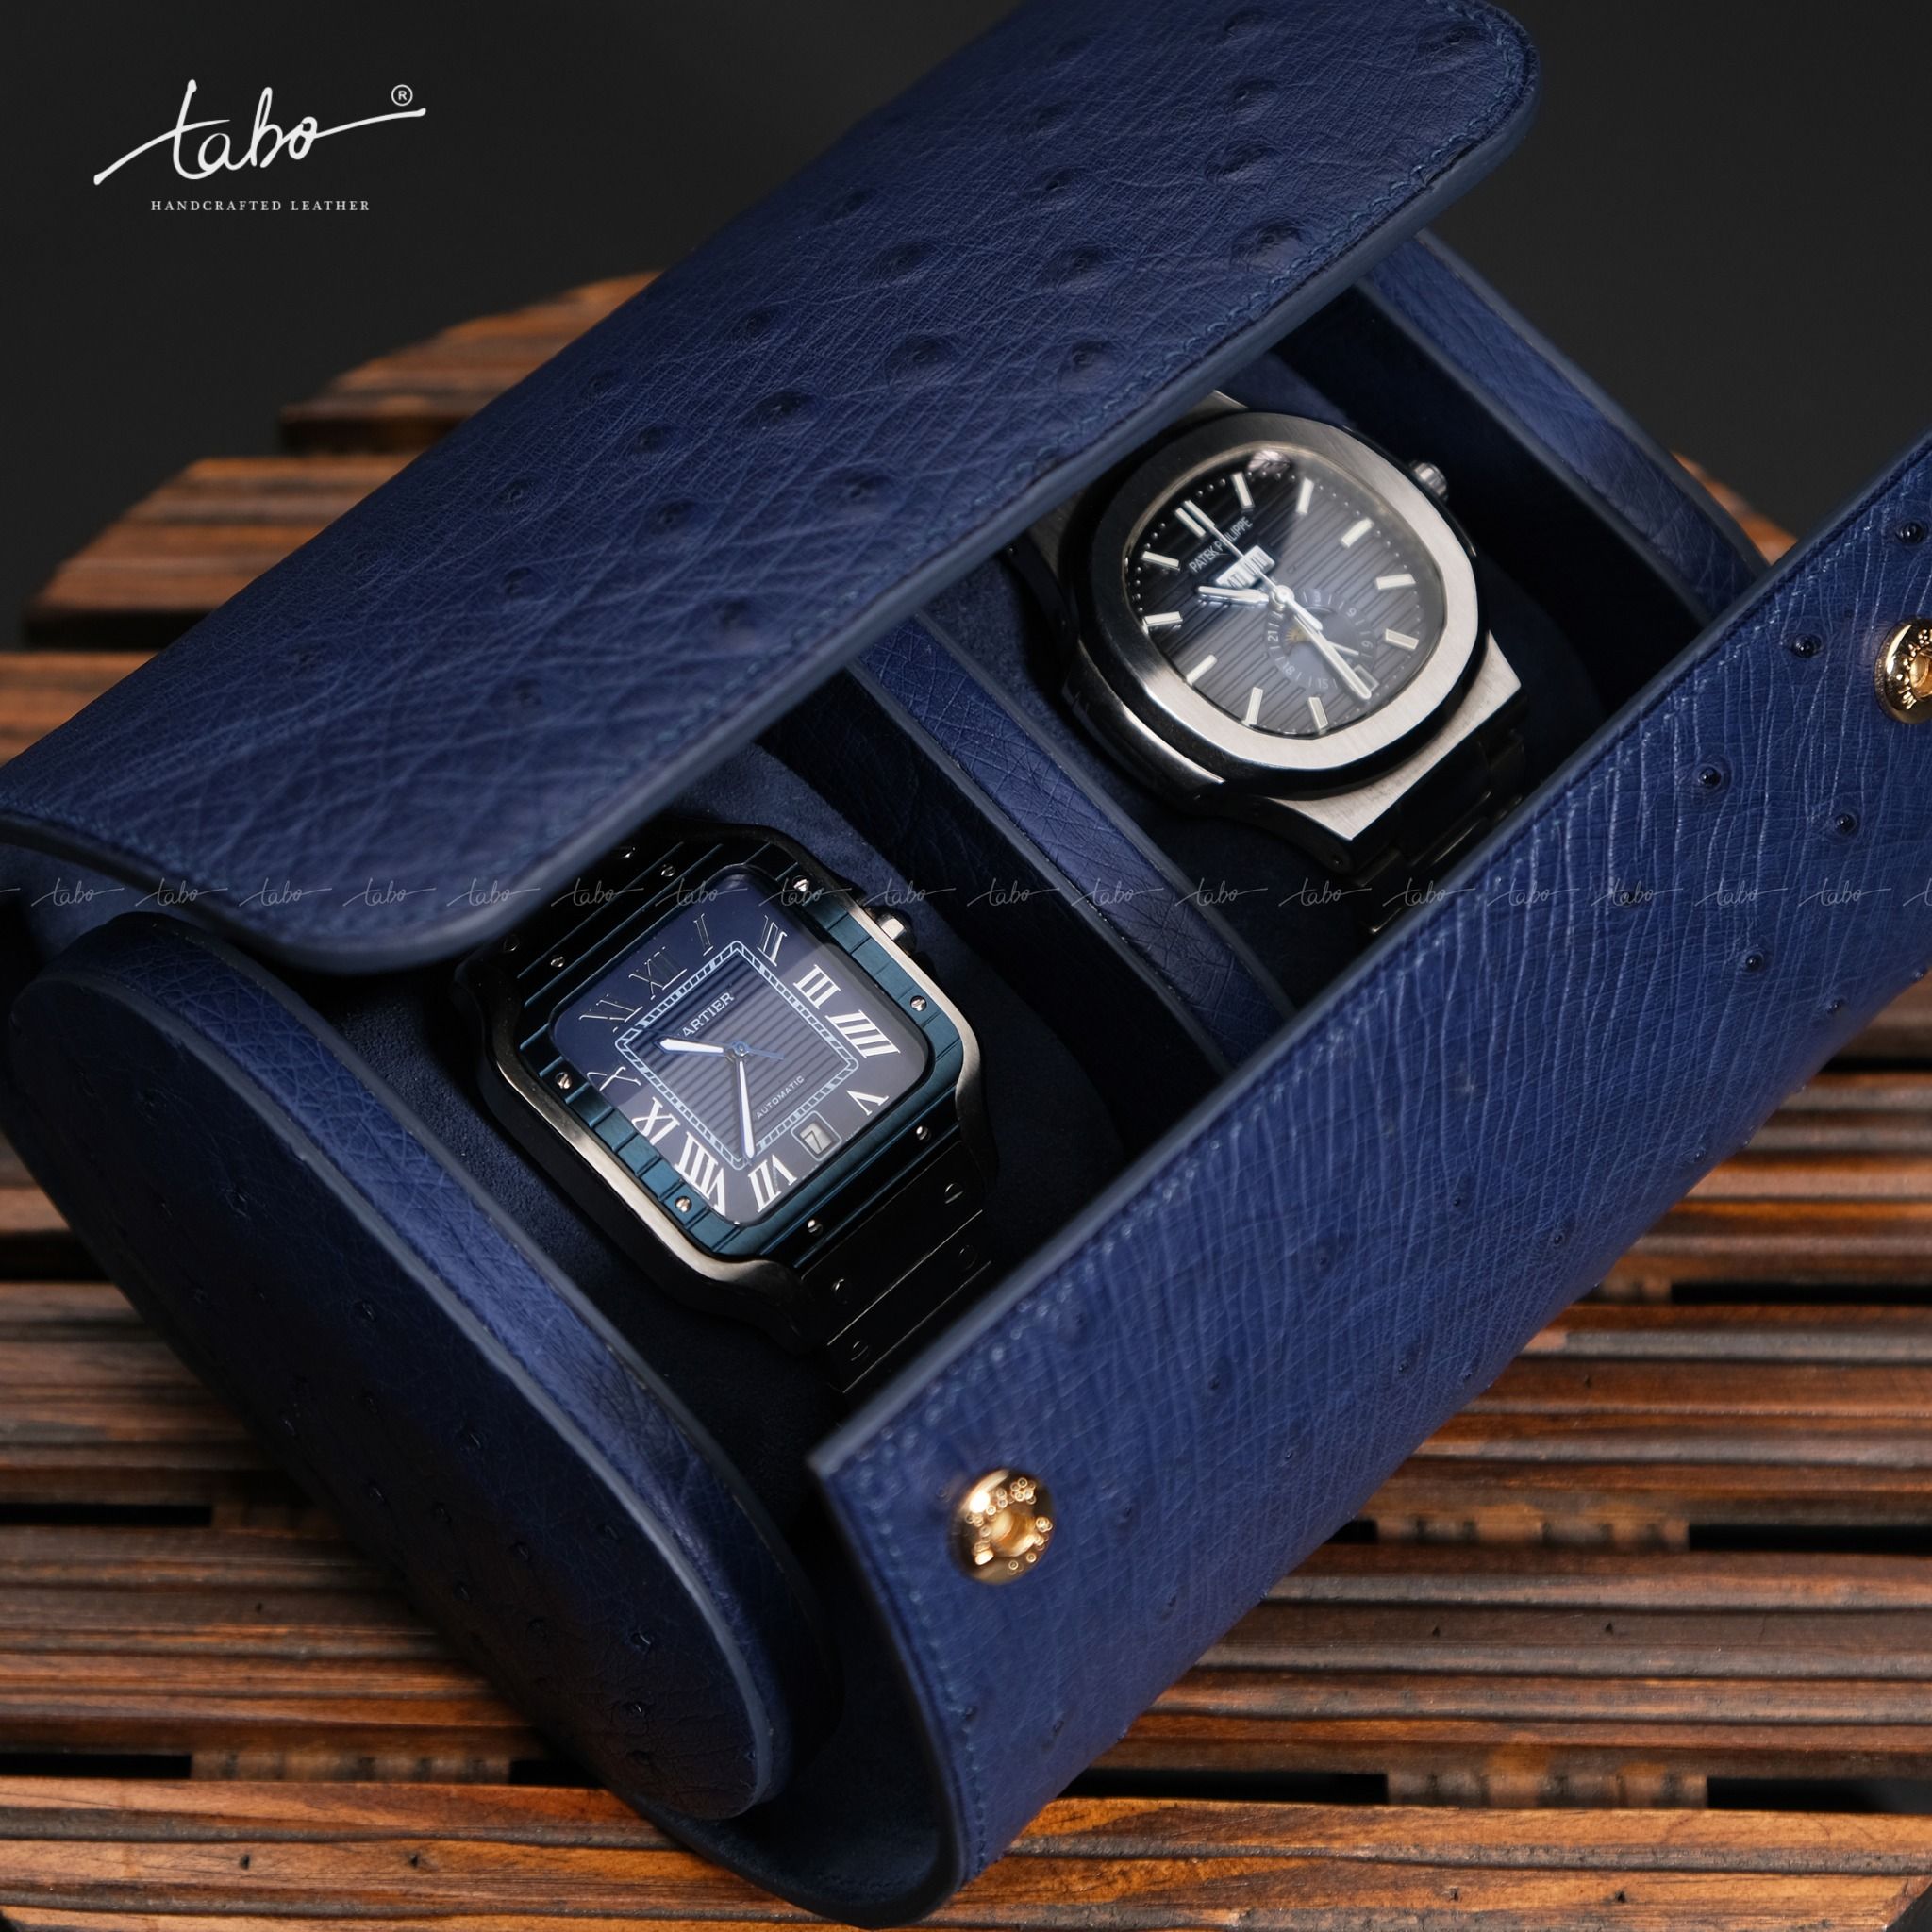  TRAVEL WATCH CASE FOR 2 WATCH MS03 